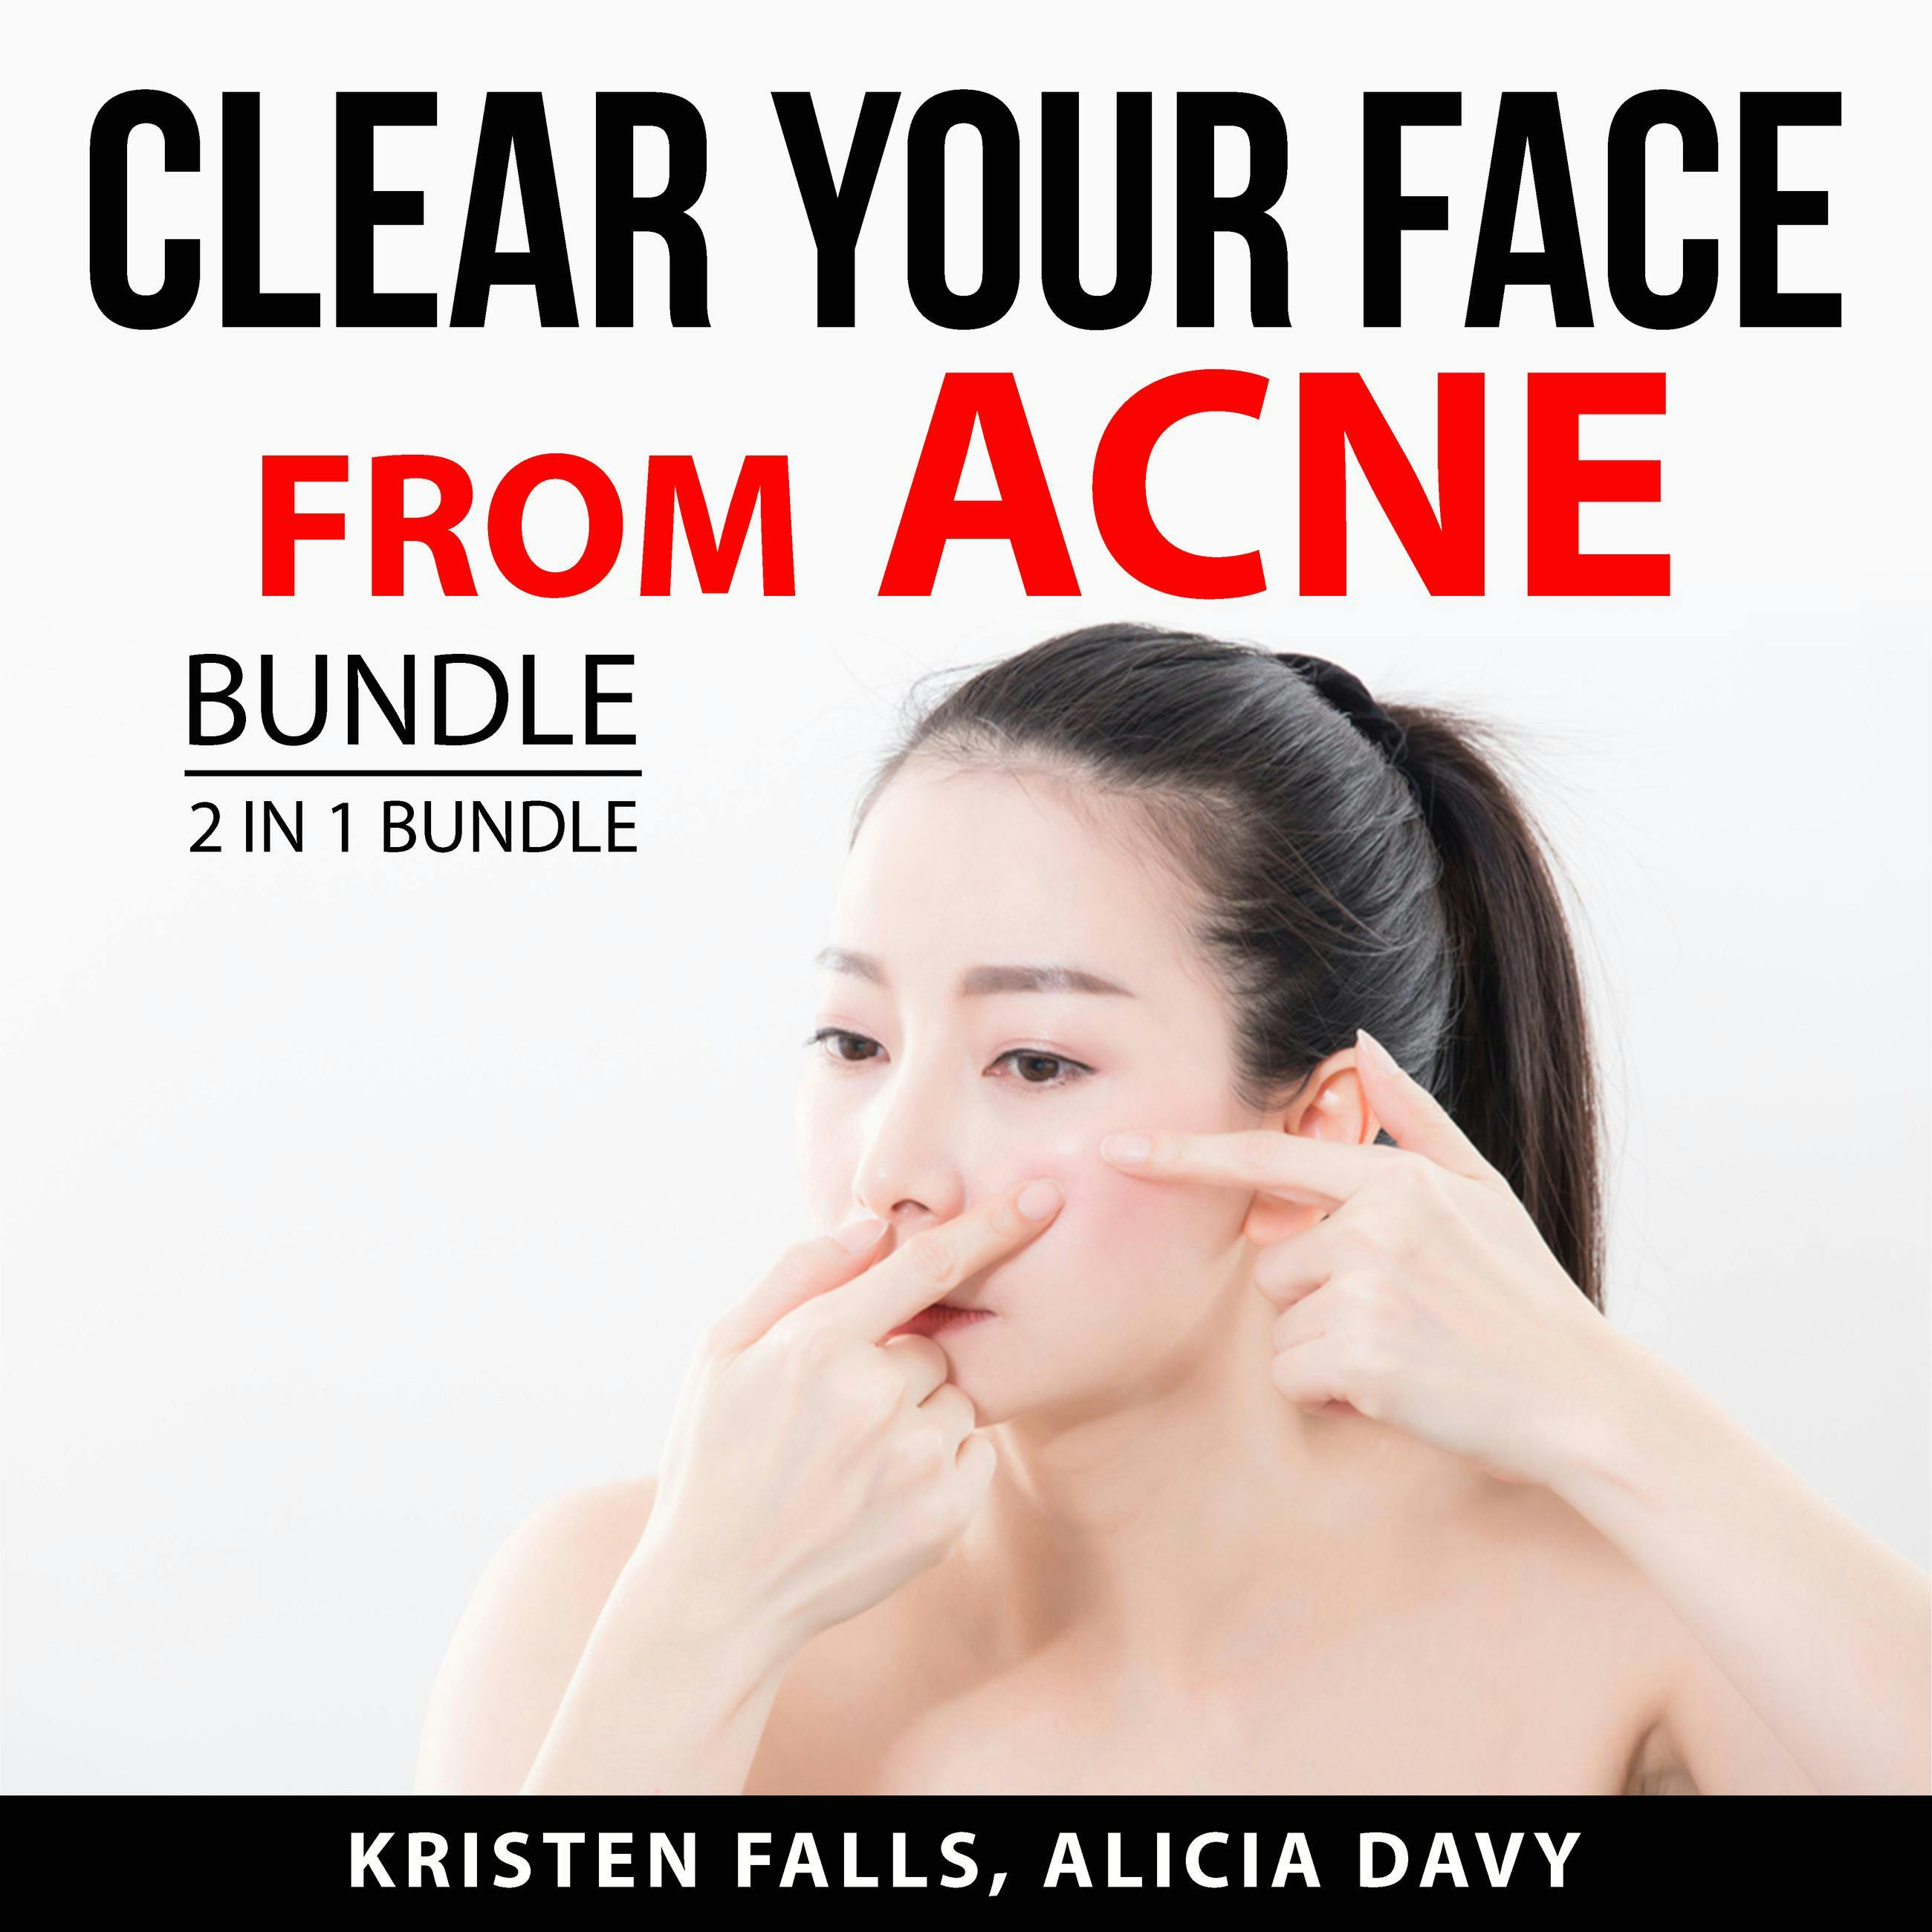 Clear Your Face From Acne Bundle, 2 in 1 Bundle: Cure For Acne, Get Rid of Acne - Kristen Falls, Alicia Davy